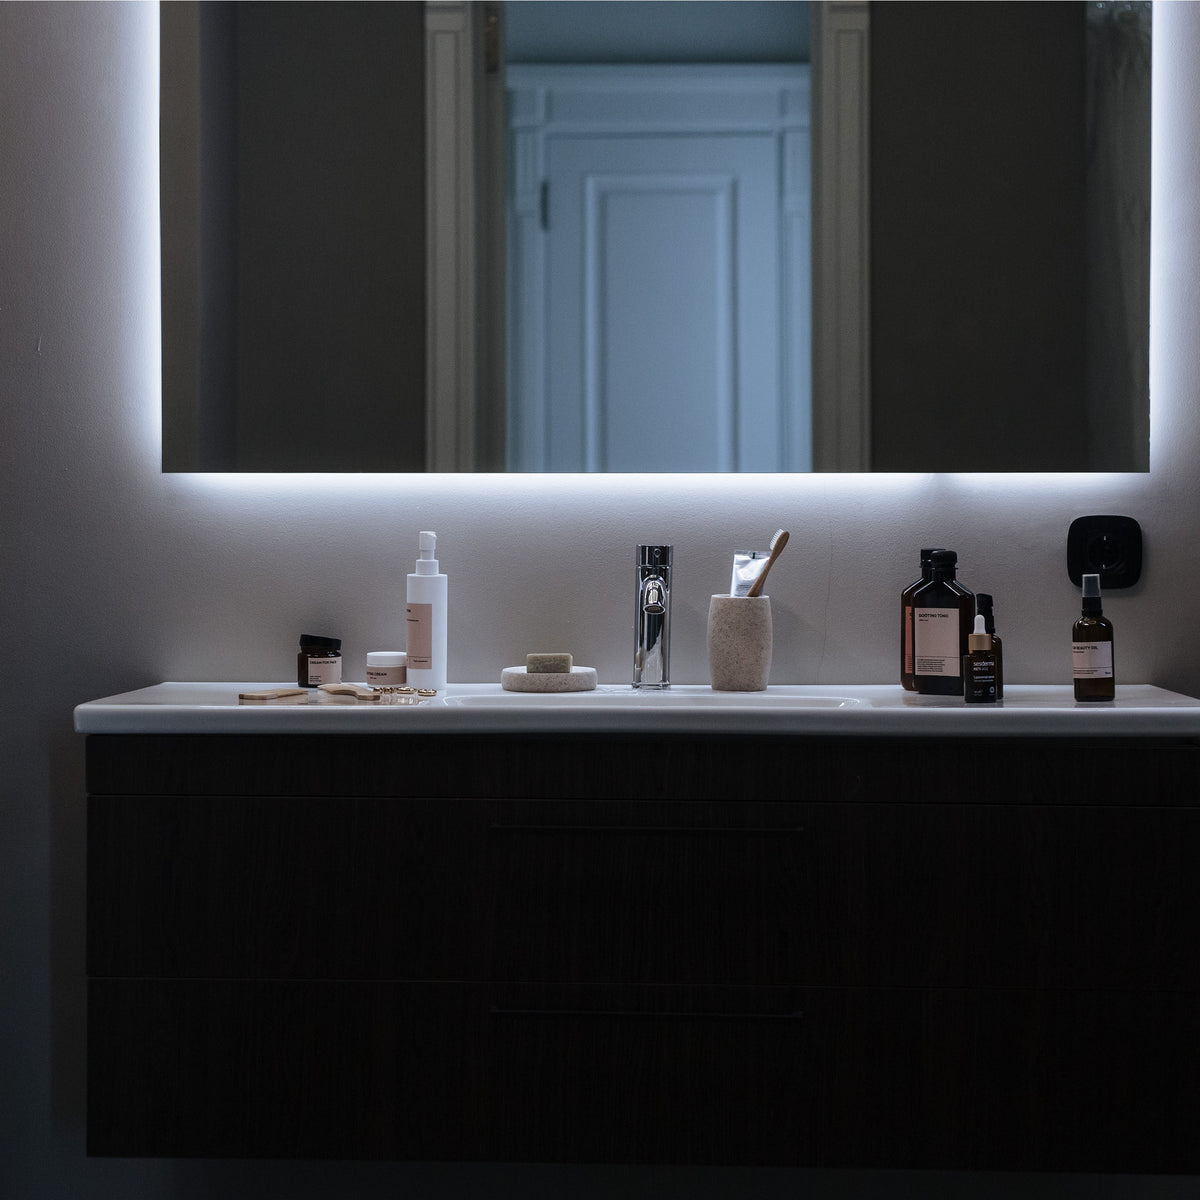 Buying Guide: How To Choose An LED Mirror - Roomhints